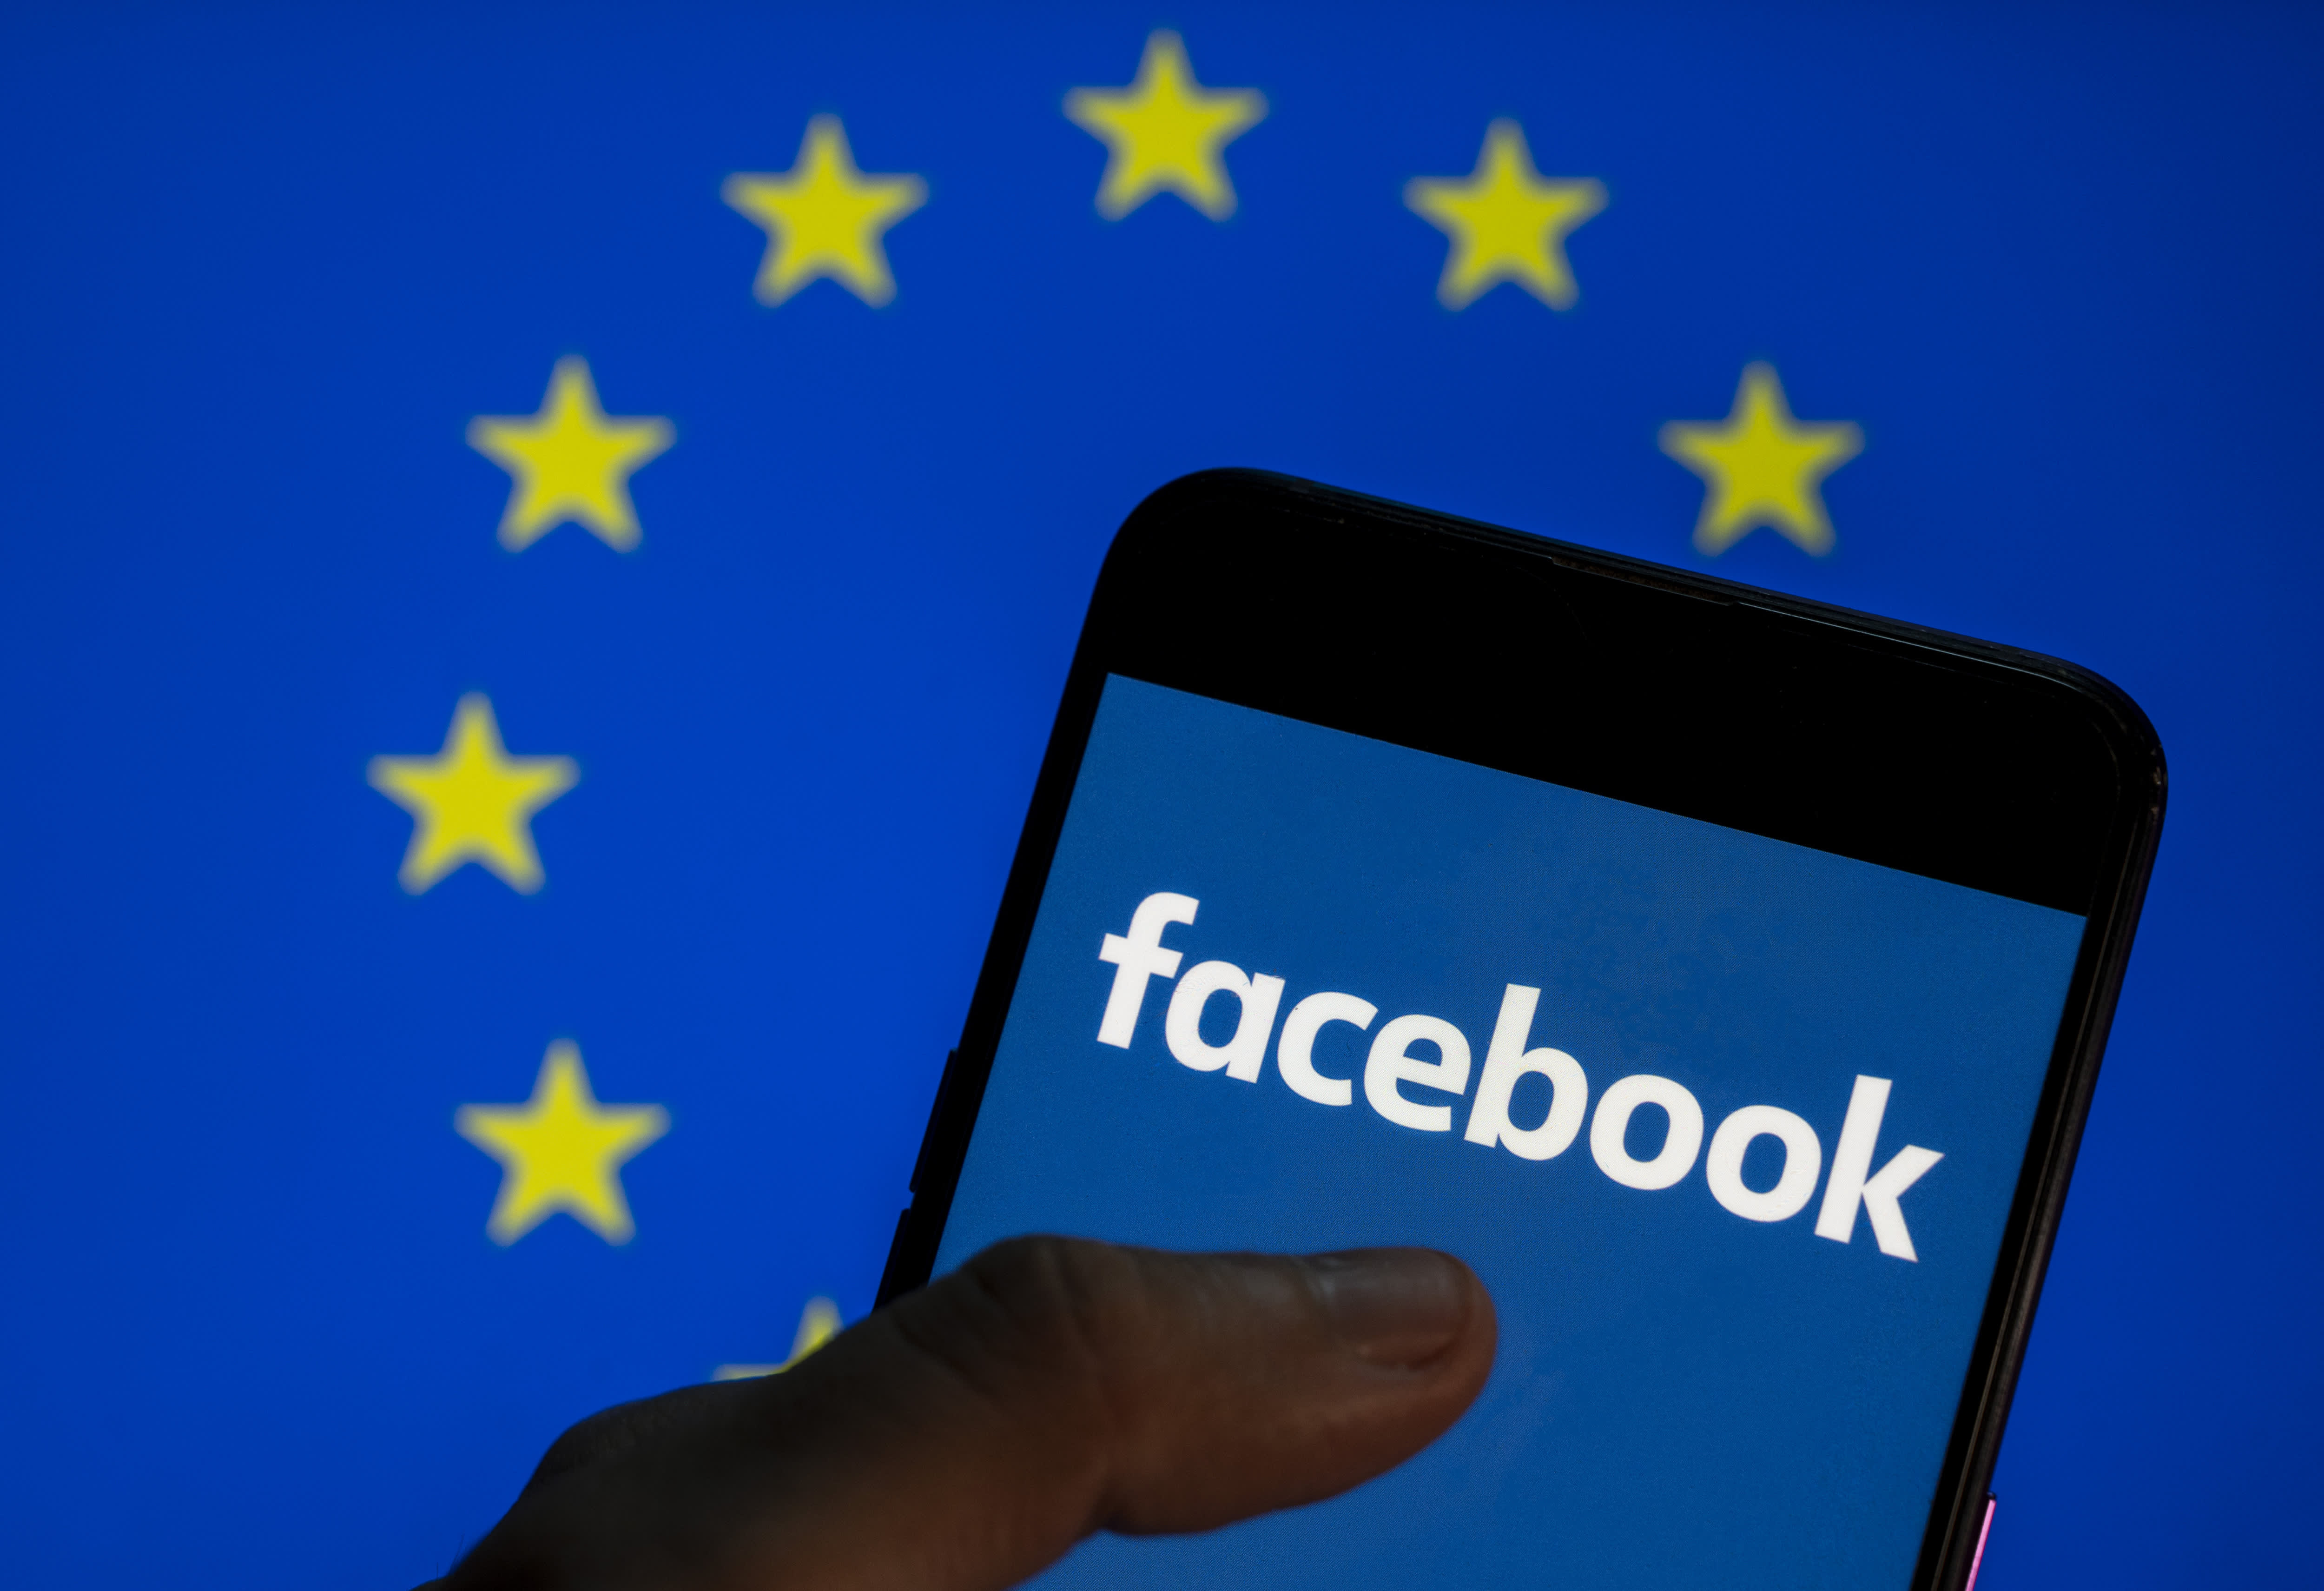 Facebook plans to hire 10,000 people in the EU to build its vision for a 'metave..